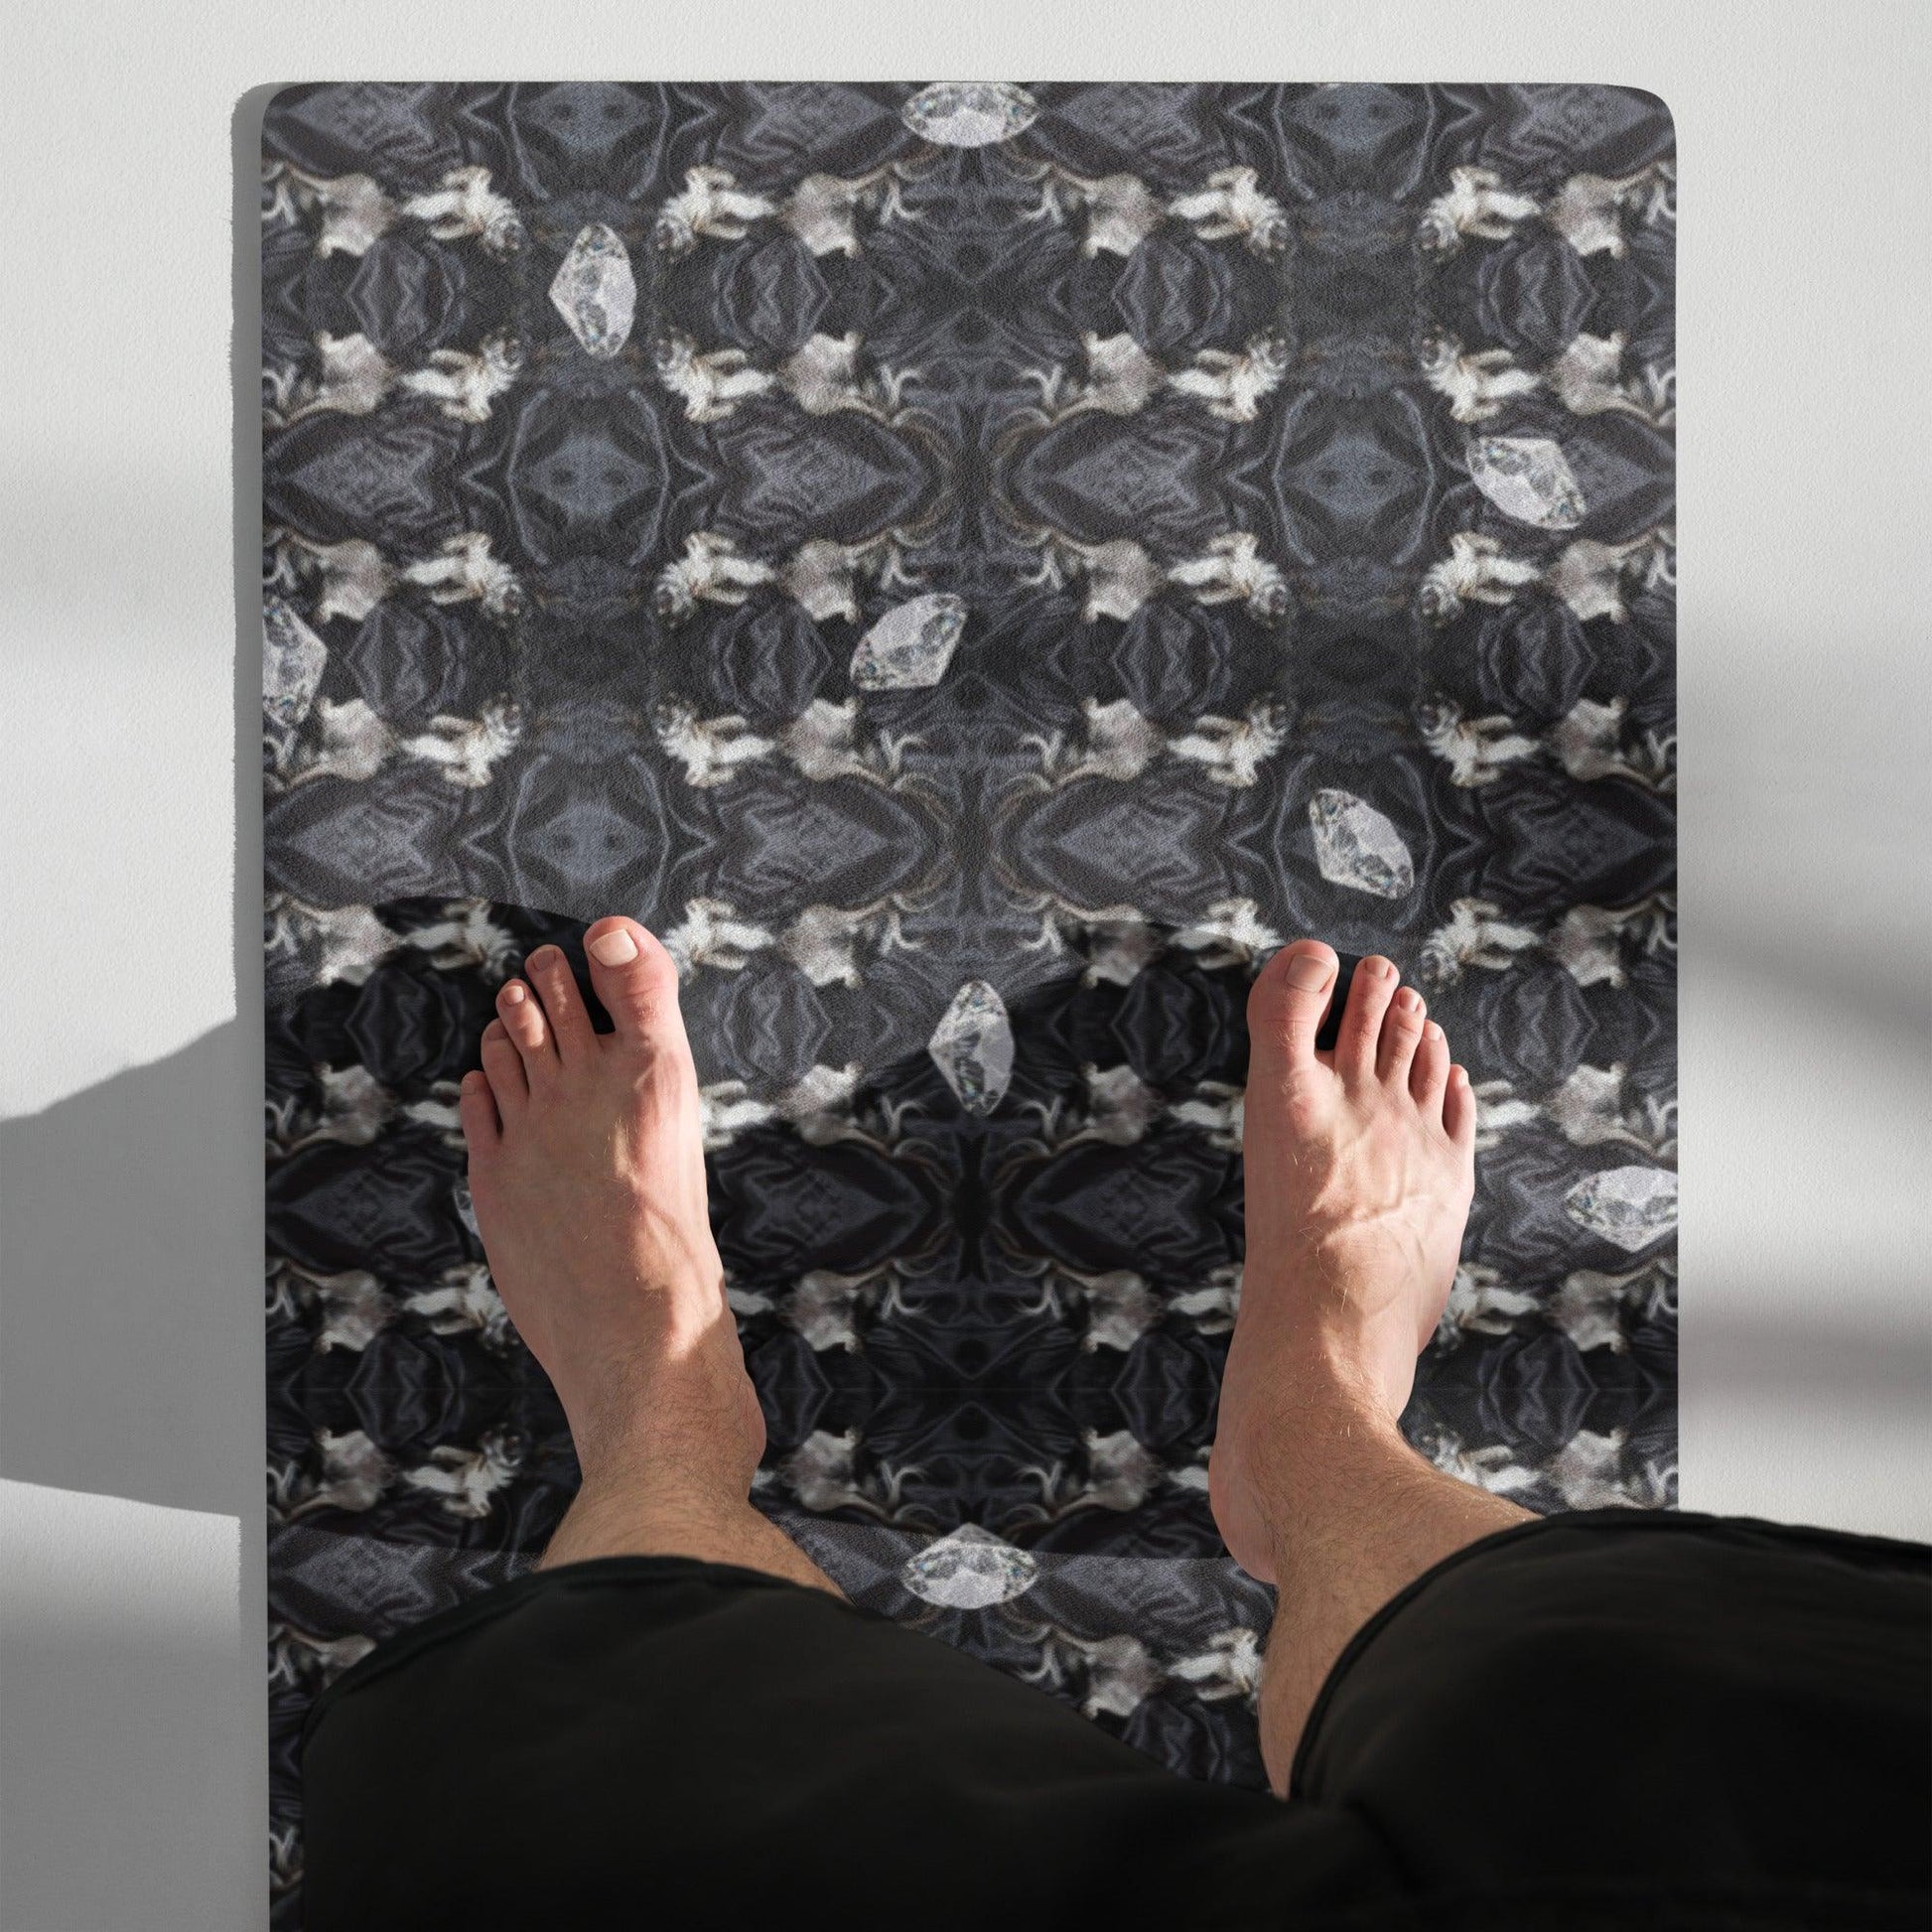 This unique yoga mat features a stylish black and white Art Deco pattern with a contemporary bling twist. A gorgeous longhaired chihuahua boy posing seductively on a black silk sheet. On repeat. And scatterings of diamonds! Luxurious. Divine! Design by Renate Kriegler for Chimigos.